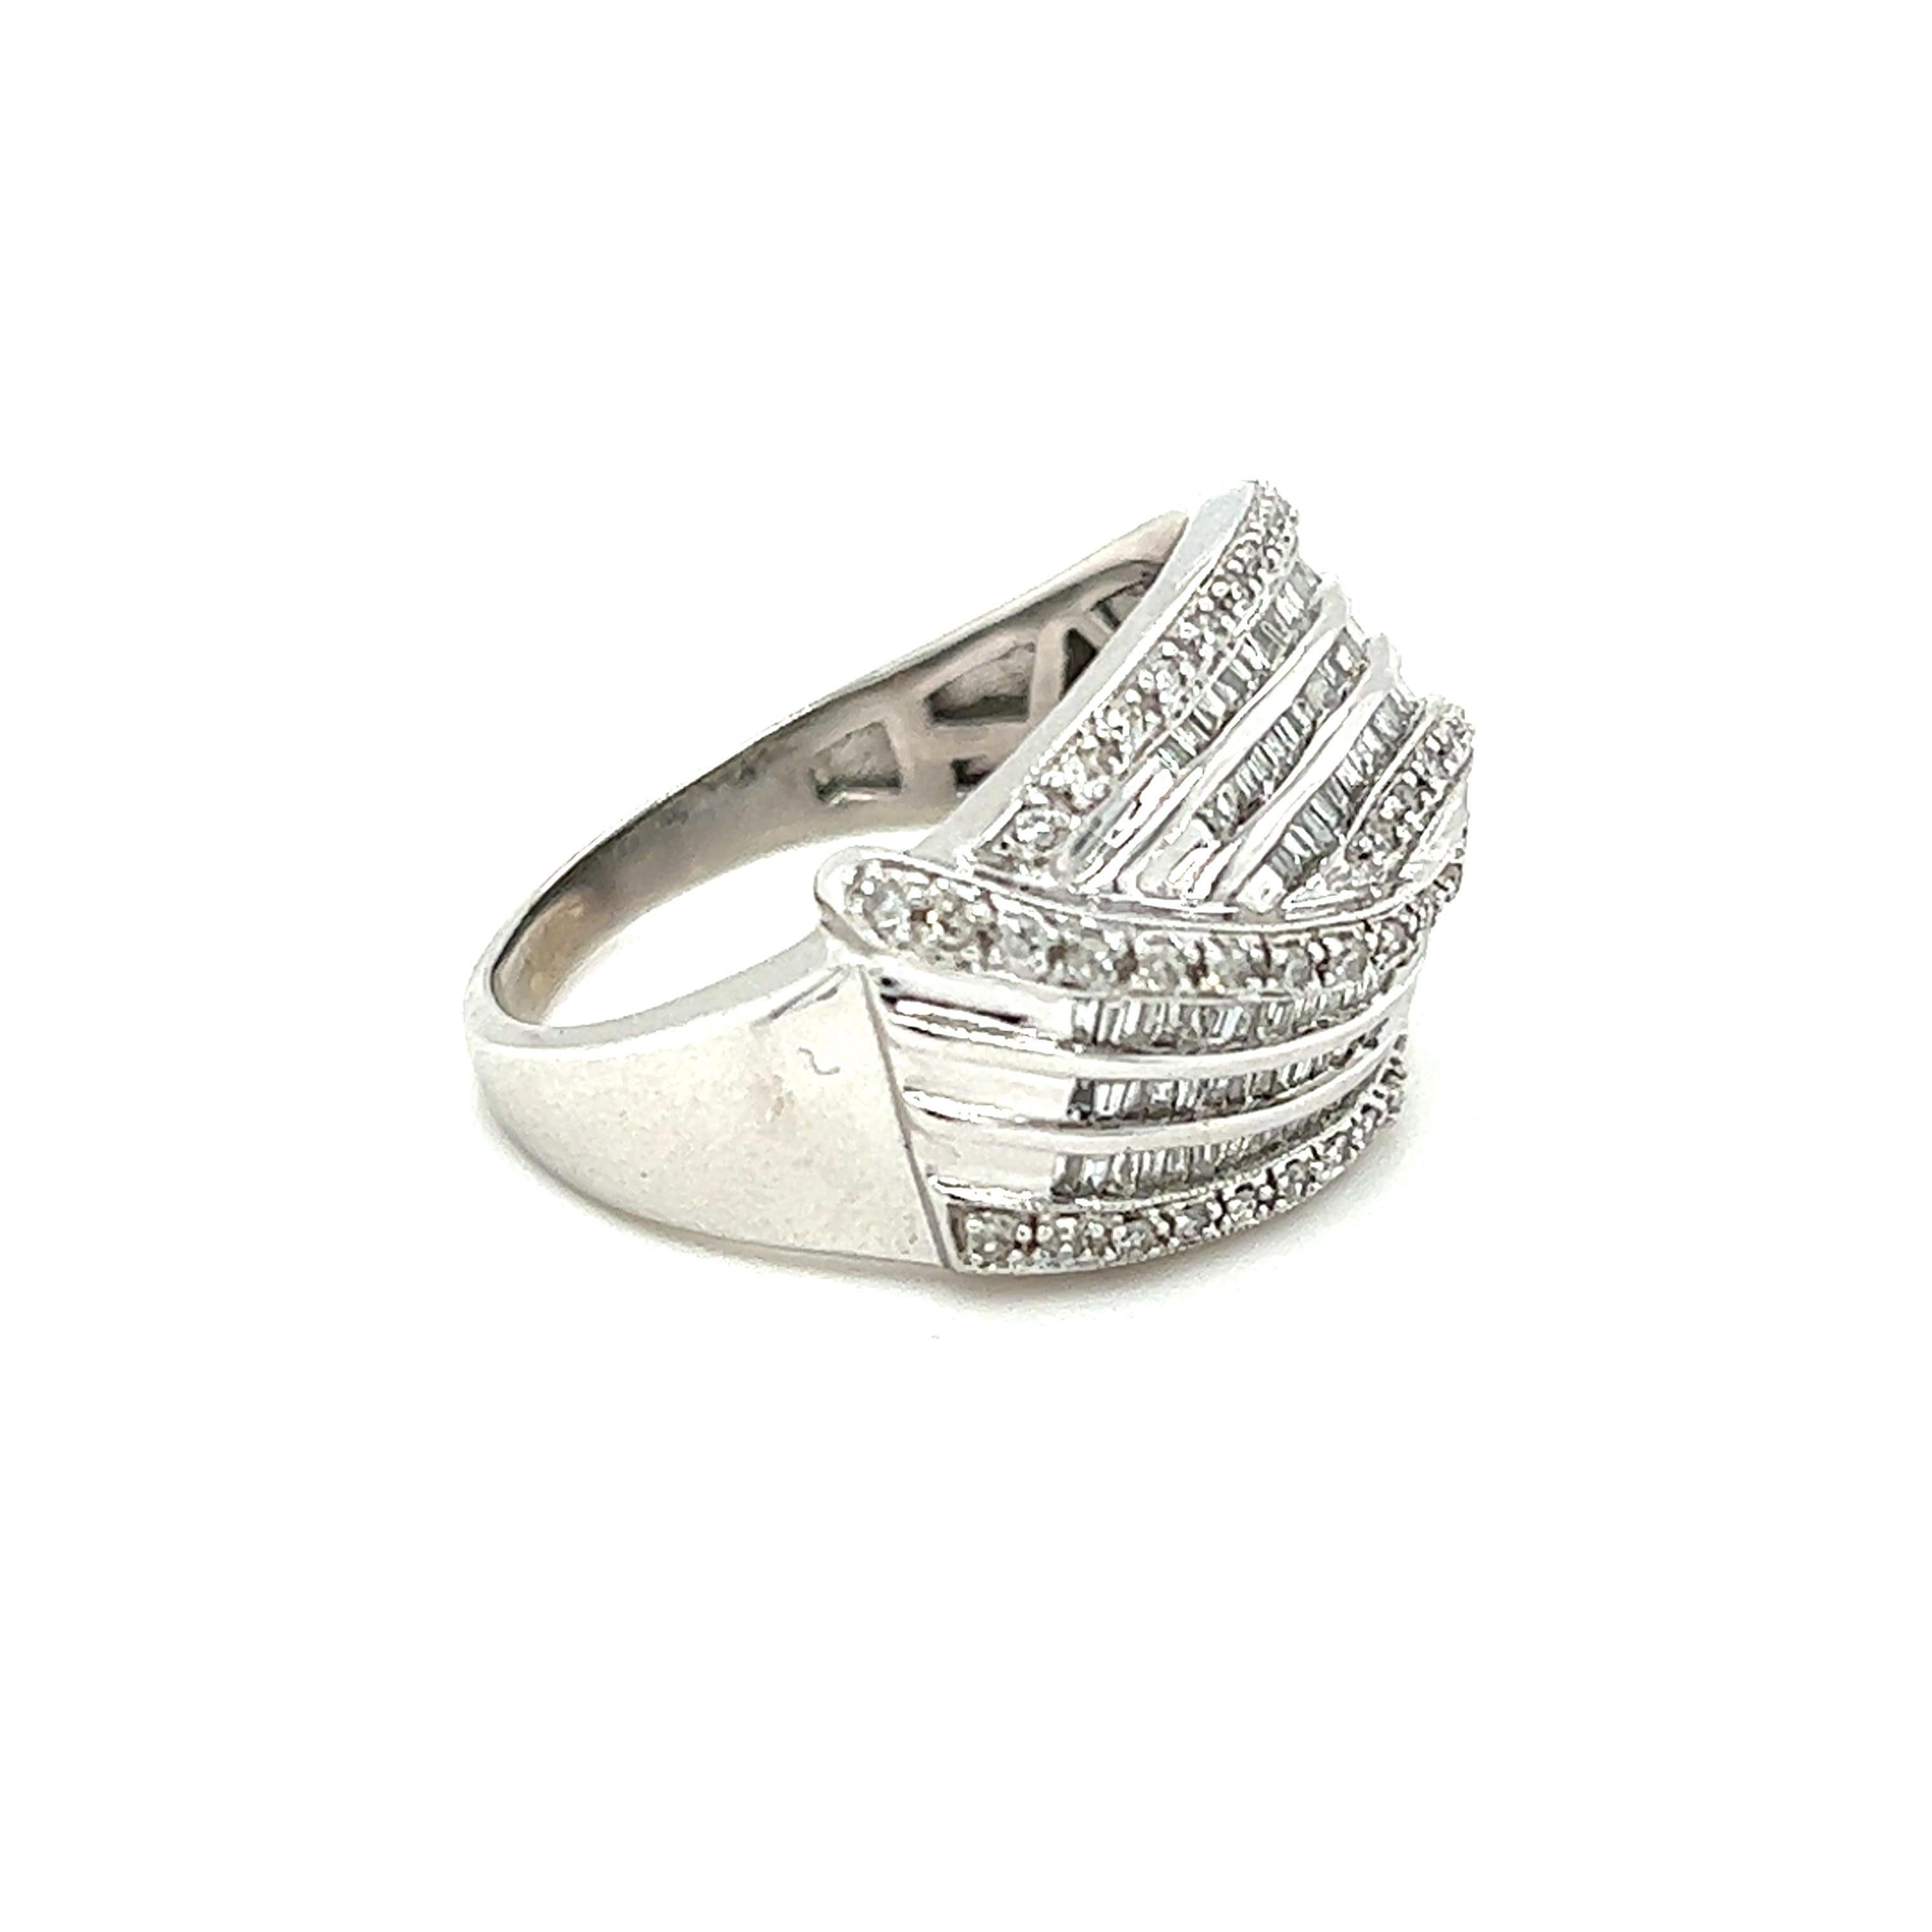 One diamond fashion ring, set with one hundred eight baguette-shaped diamonds, and fifty-five (55) round brilliant cut diamonds, approximately 1.50-carat total weight with matching I/J color and I1 clarity. The ring measures 15.45mm at the top of